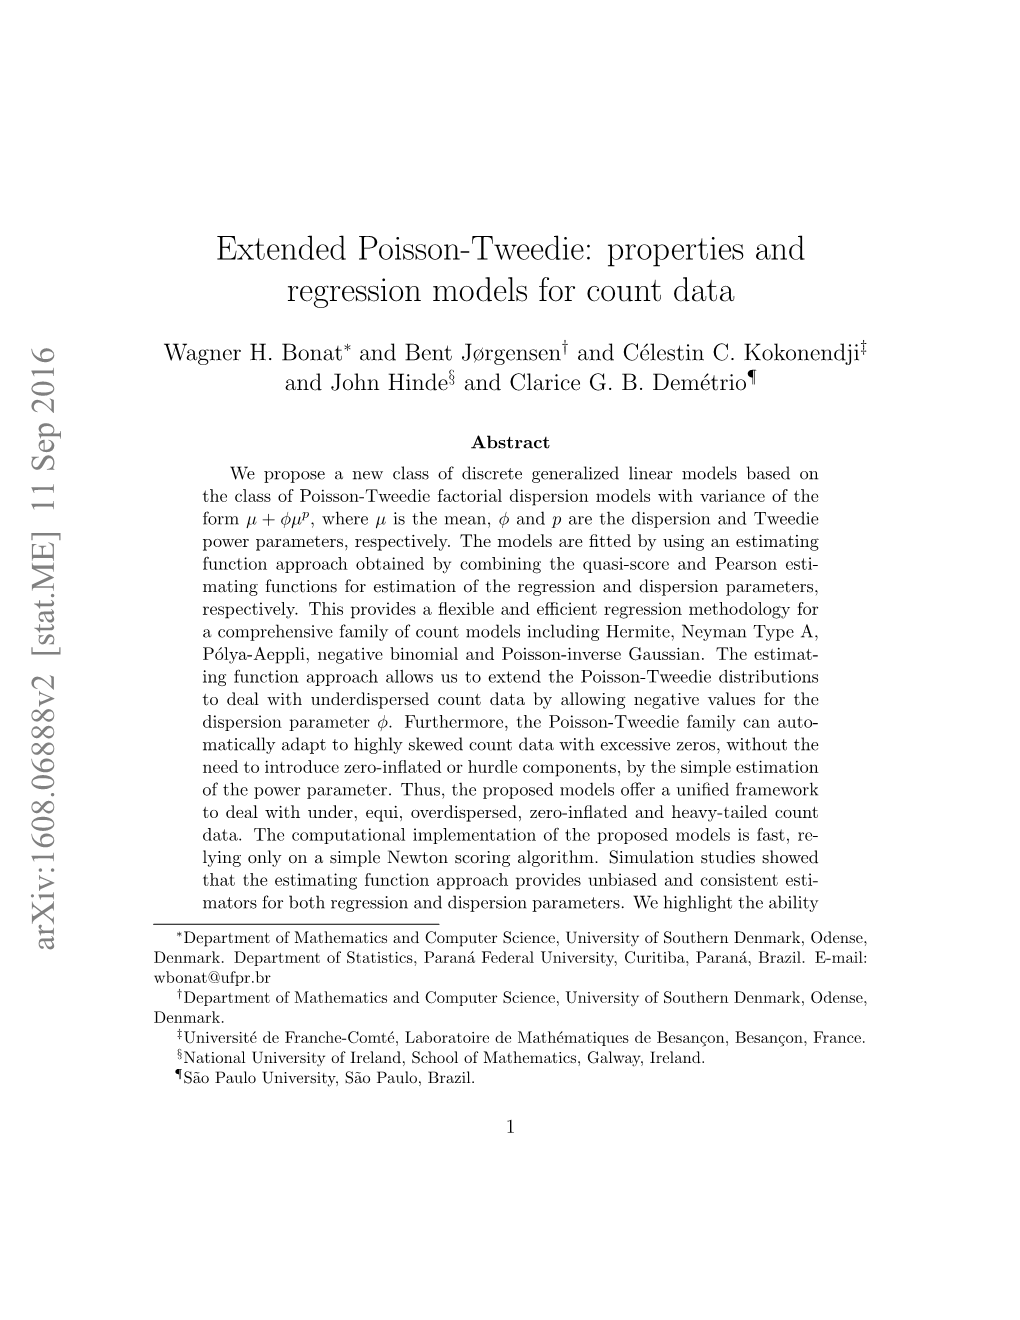 Extended Poisson-Tweedie: Properties and Regression Models for Count Data